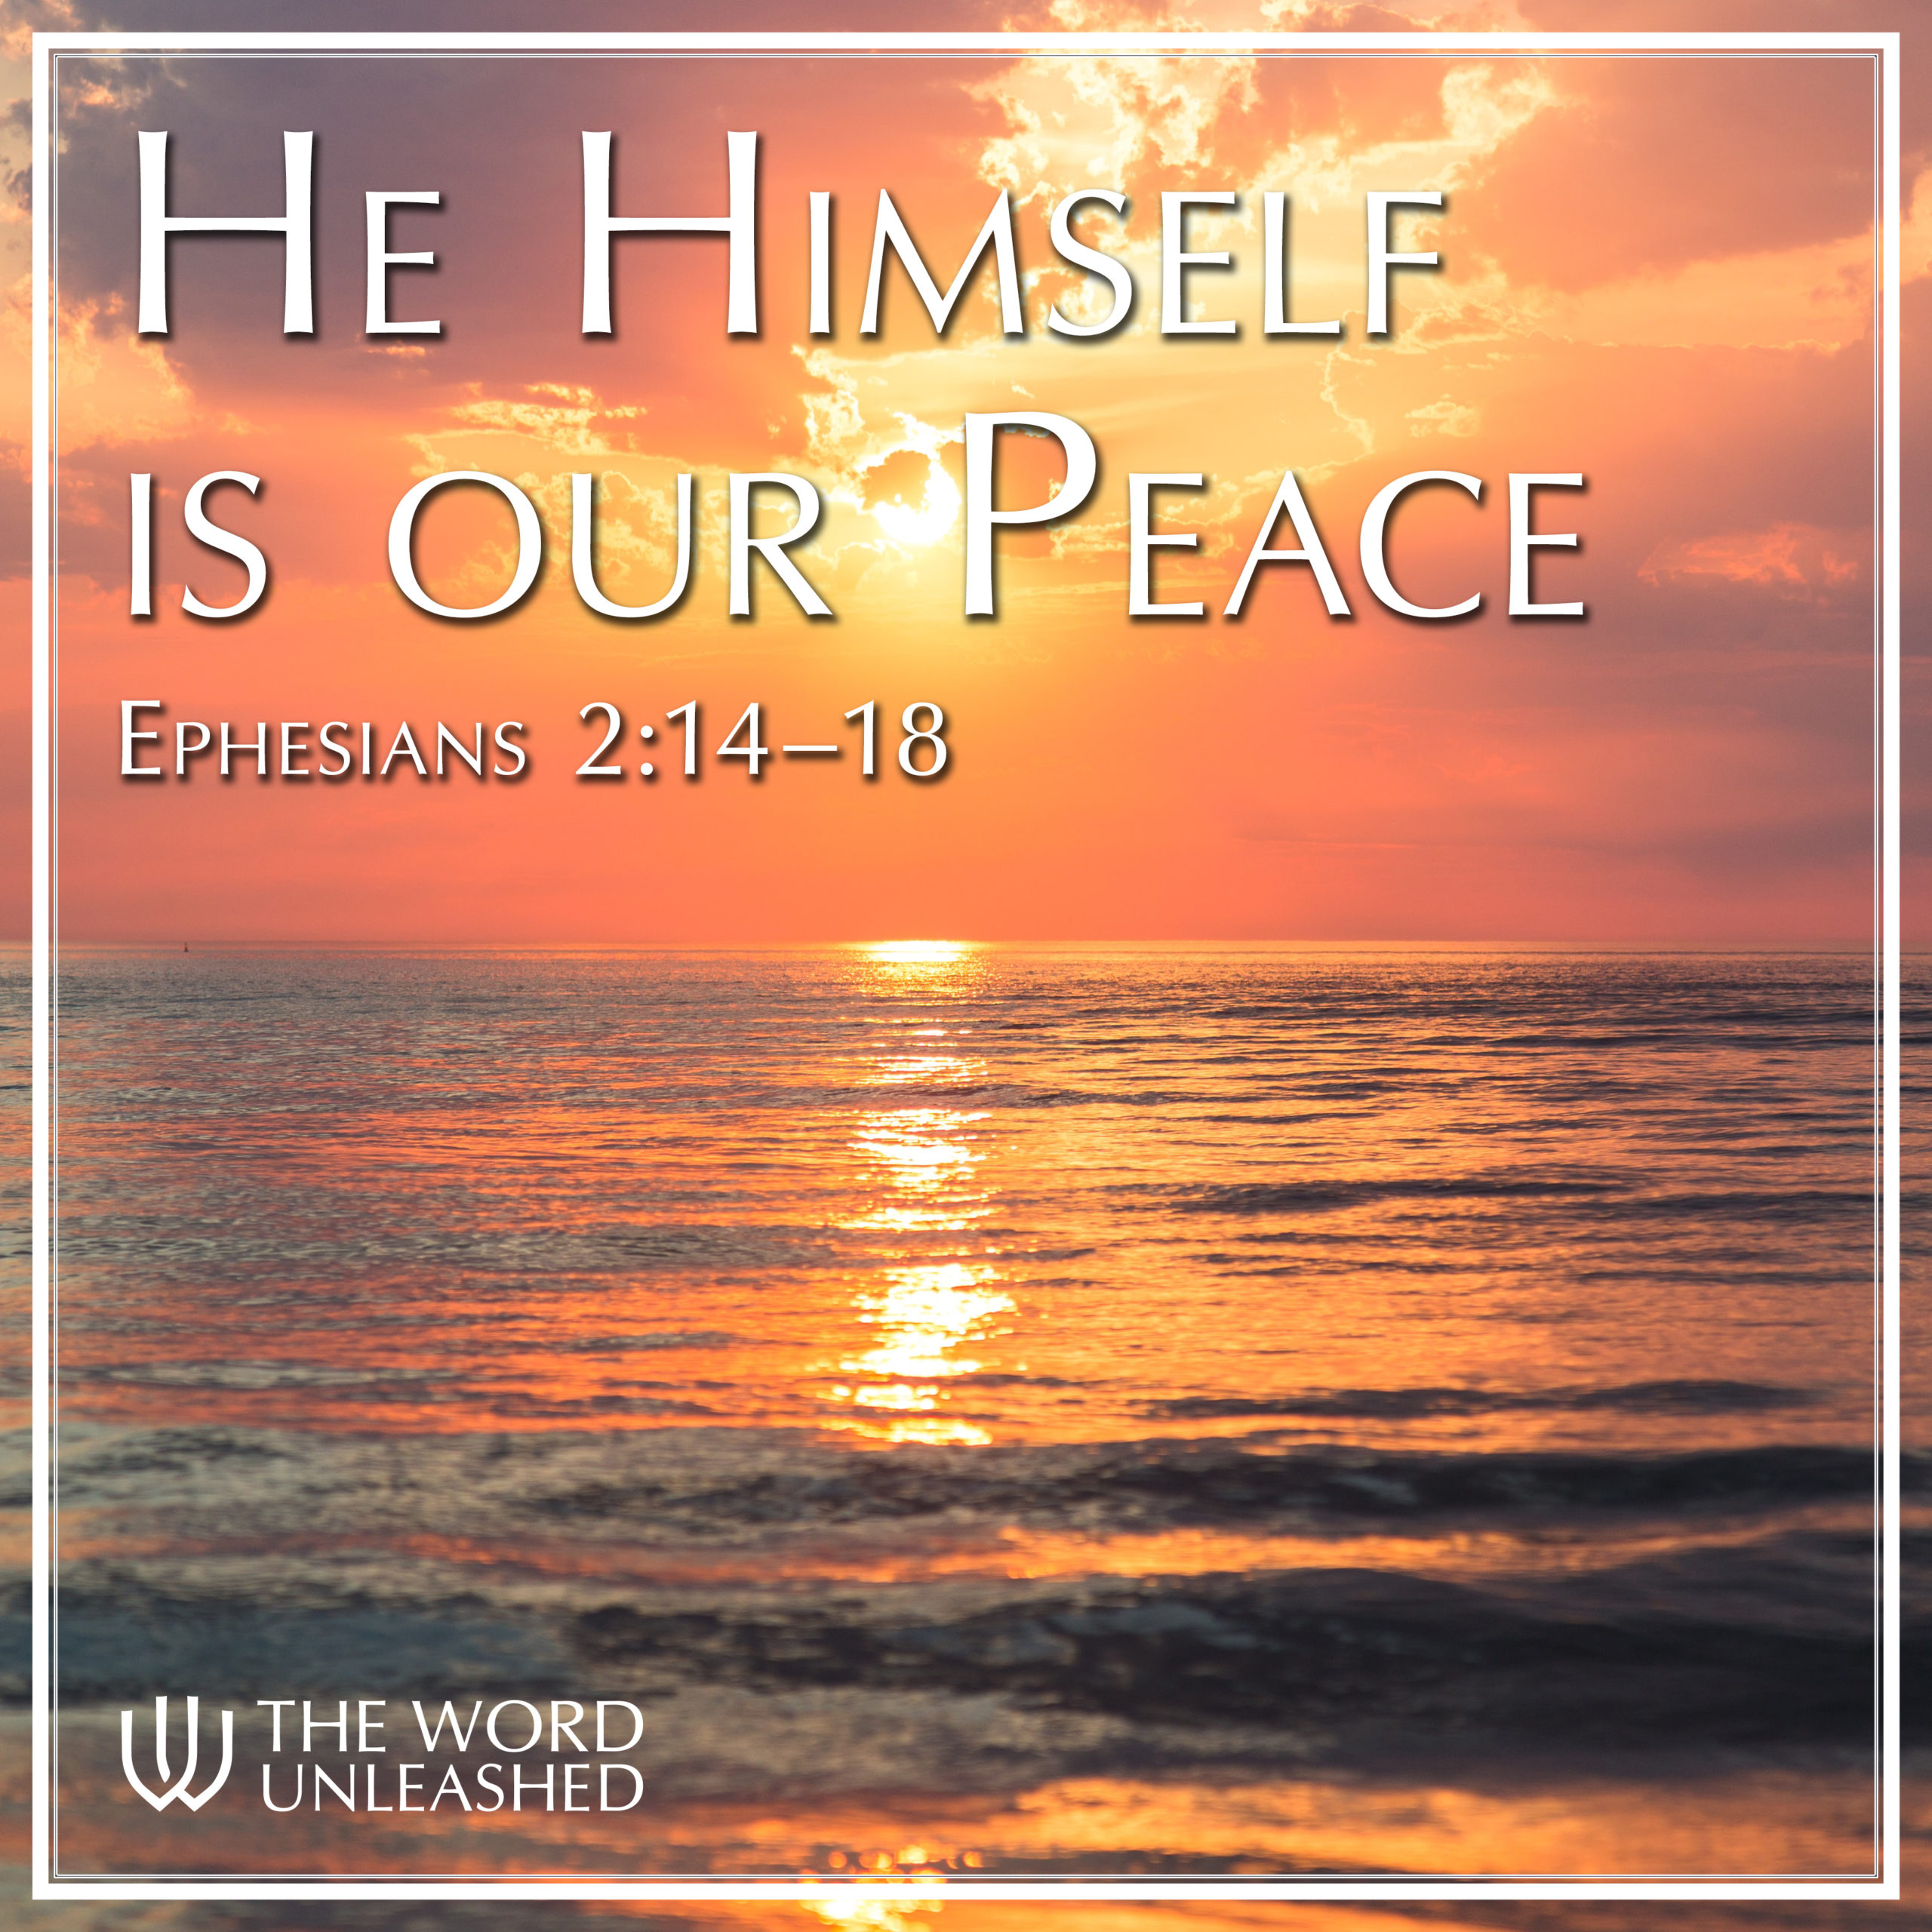 He Himself Is Our Peace